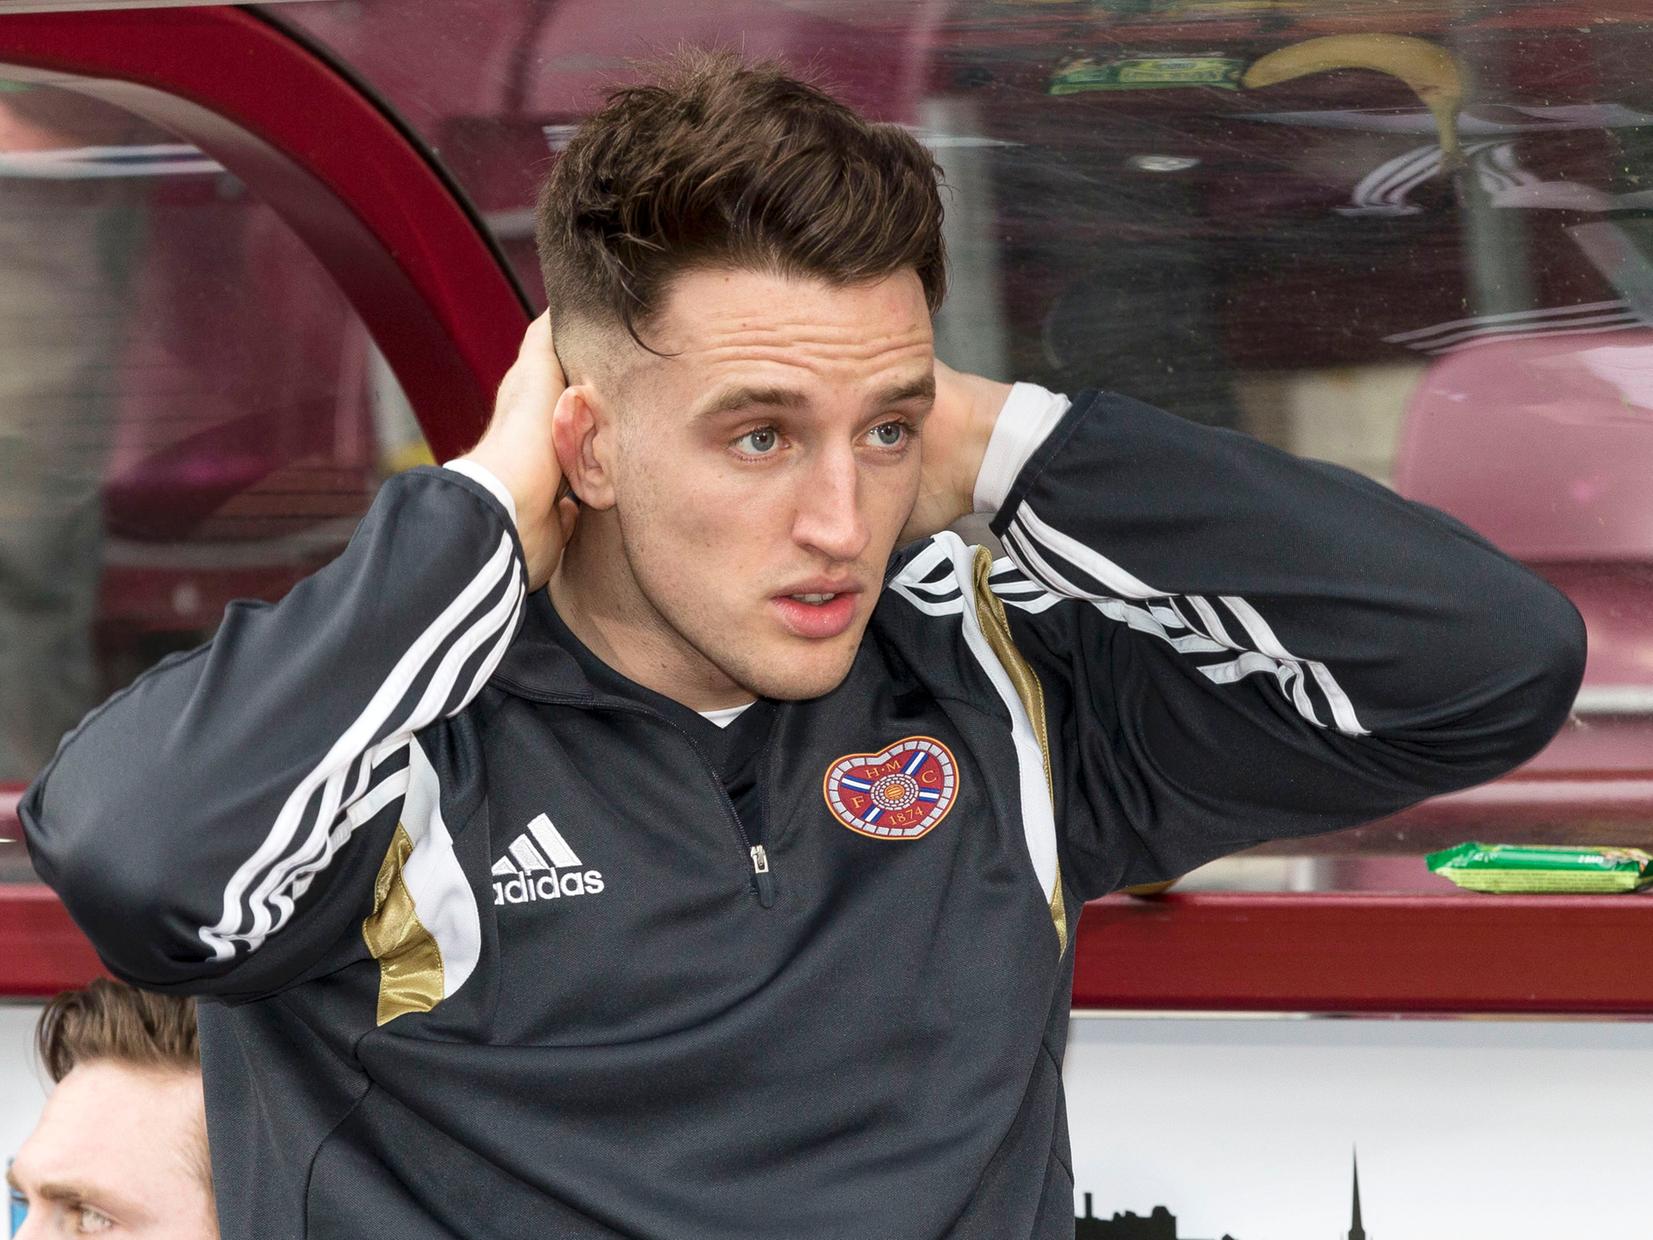 Where is he now? The centre-back is now in his fourth season with Inverness CT. He had a brief stint with St Johnstone after leaving Tynecastle, along with a loan spell at Dunfermline.